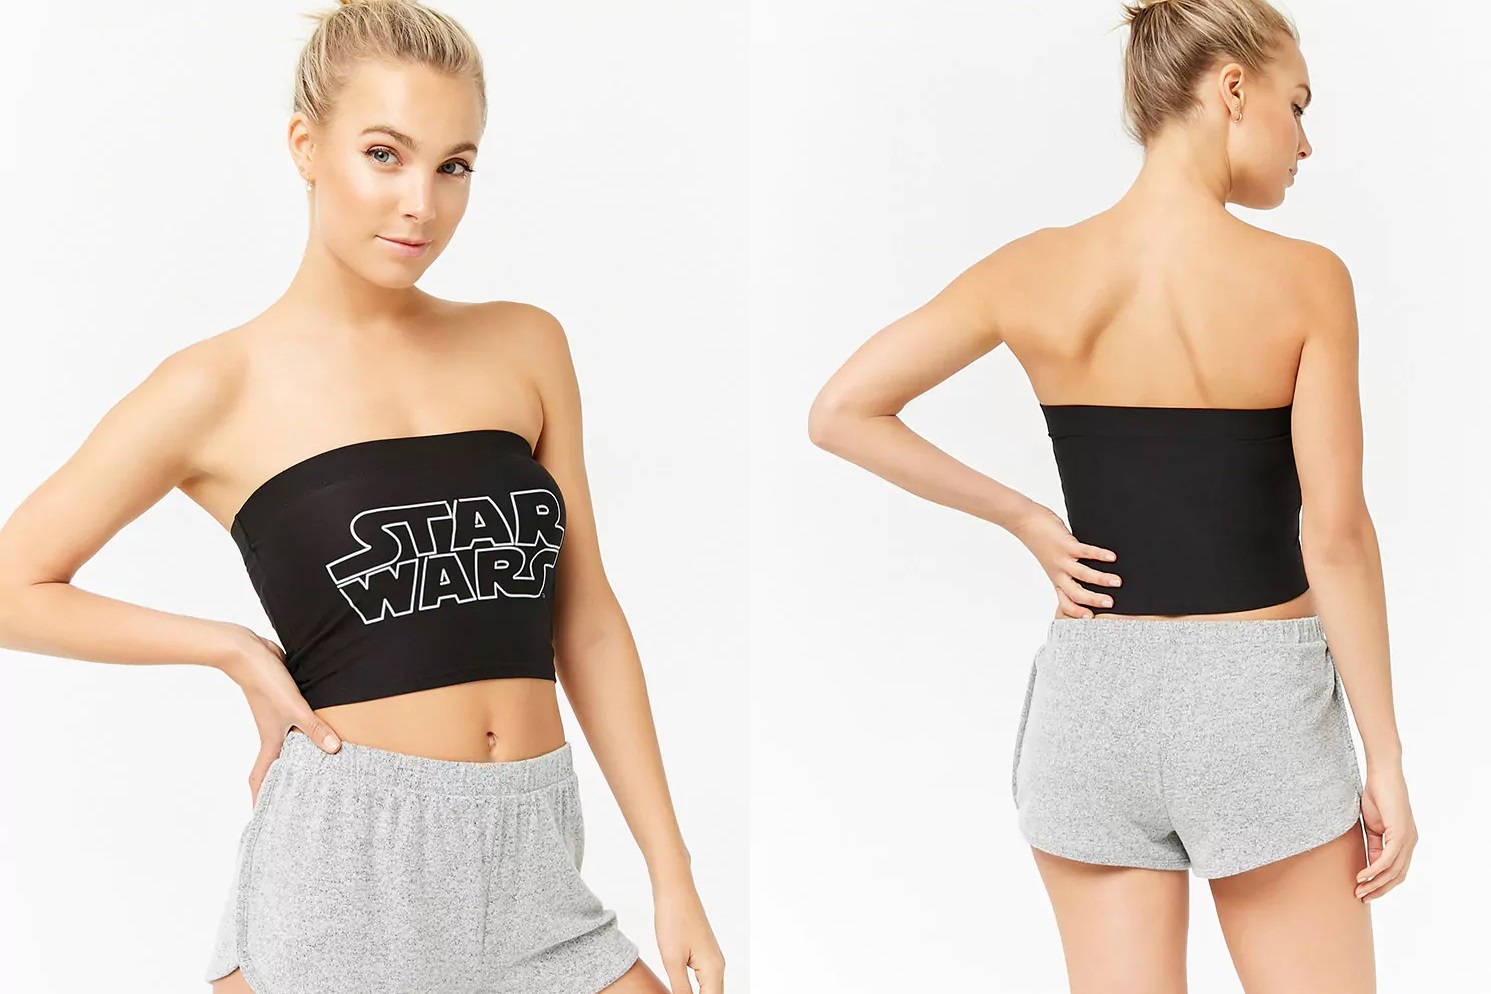 Women’s Star Wars Tube Top at Forever 21